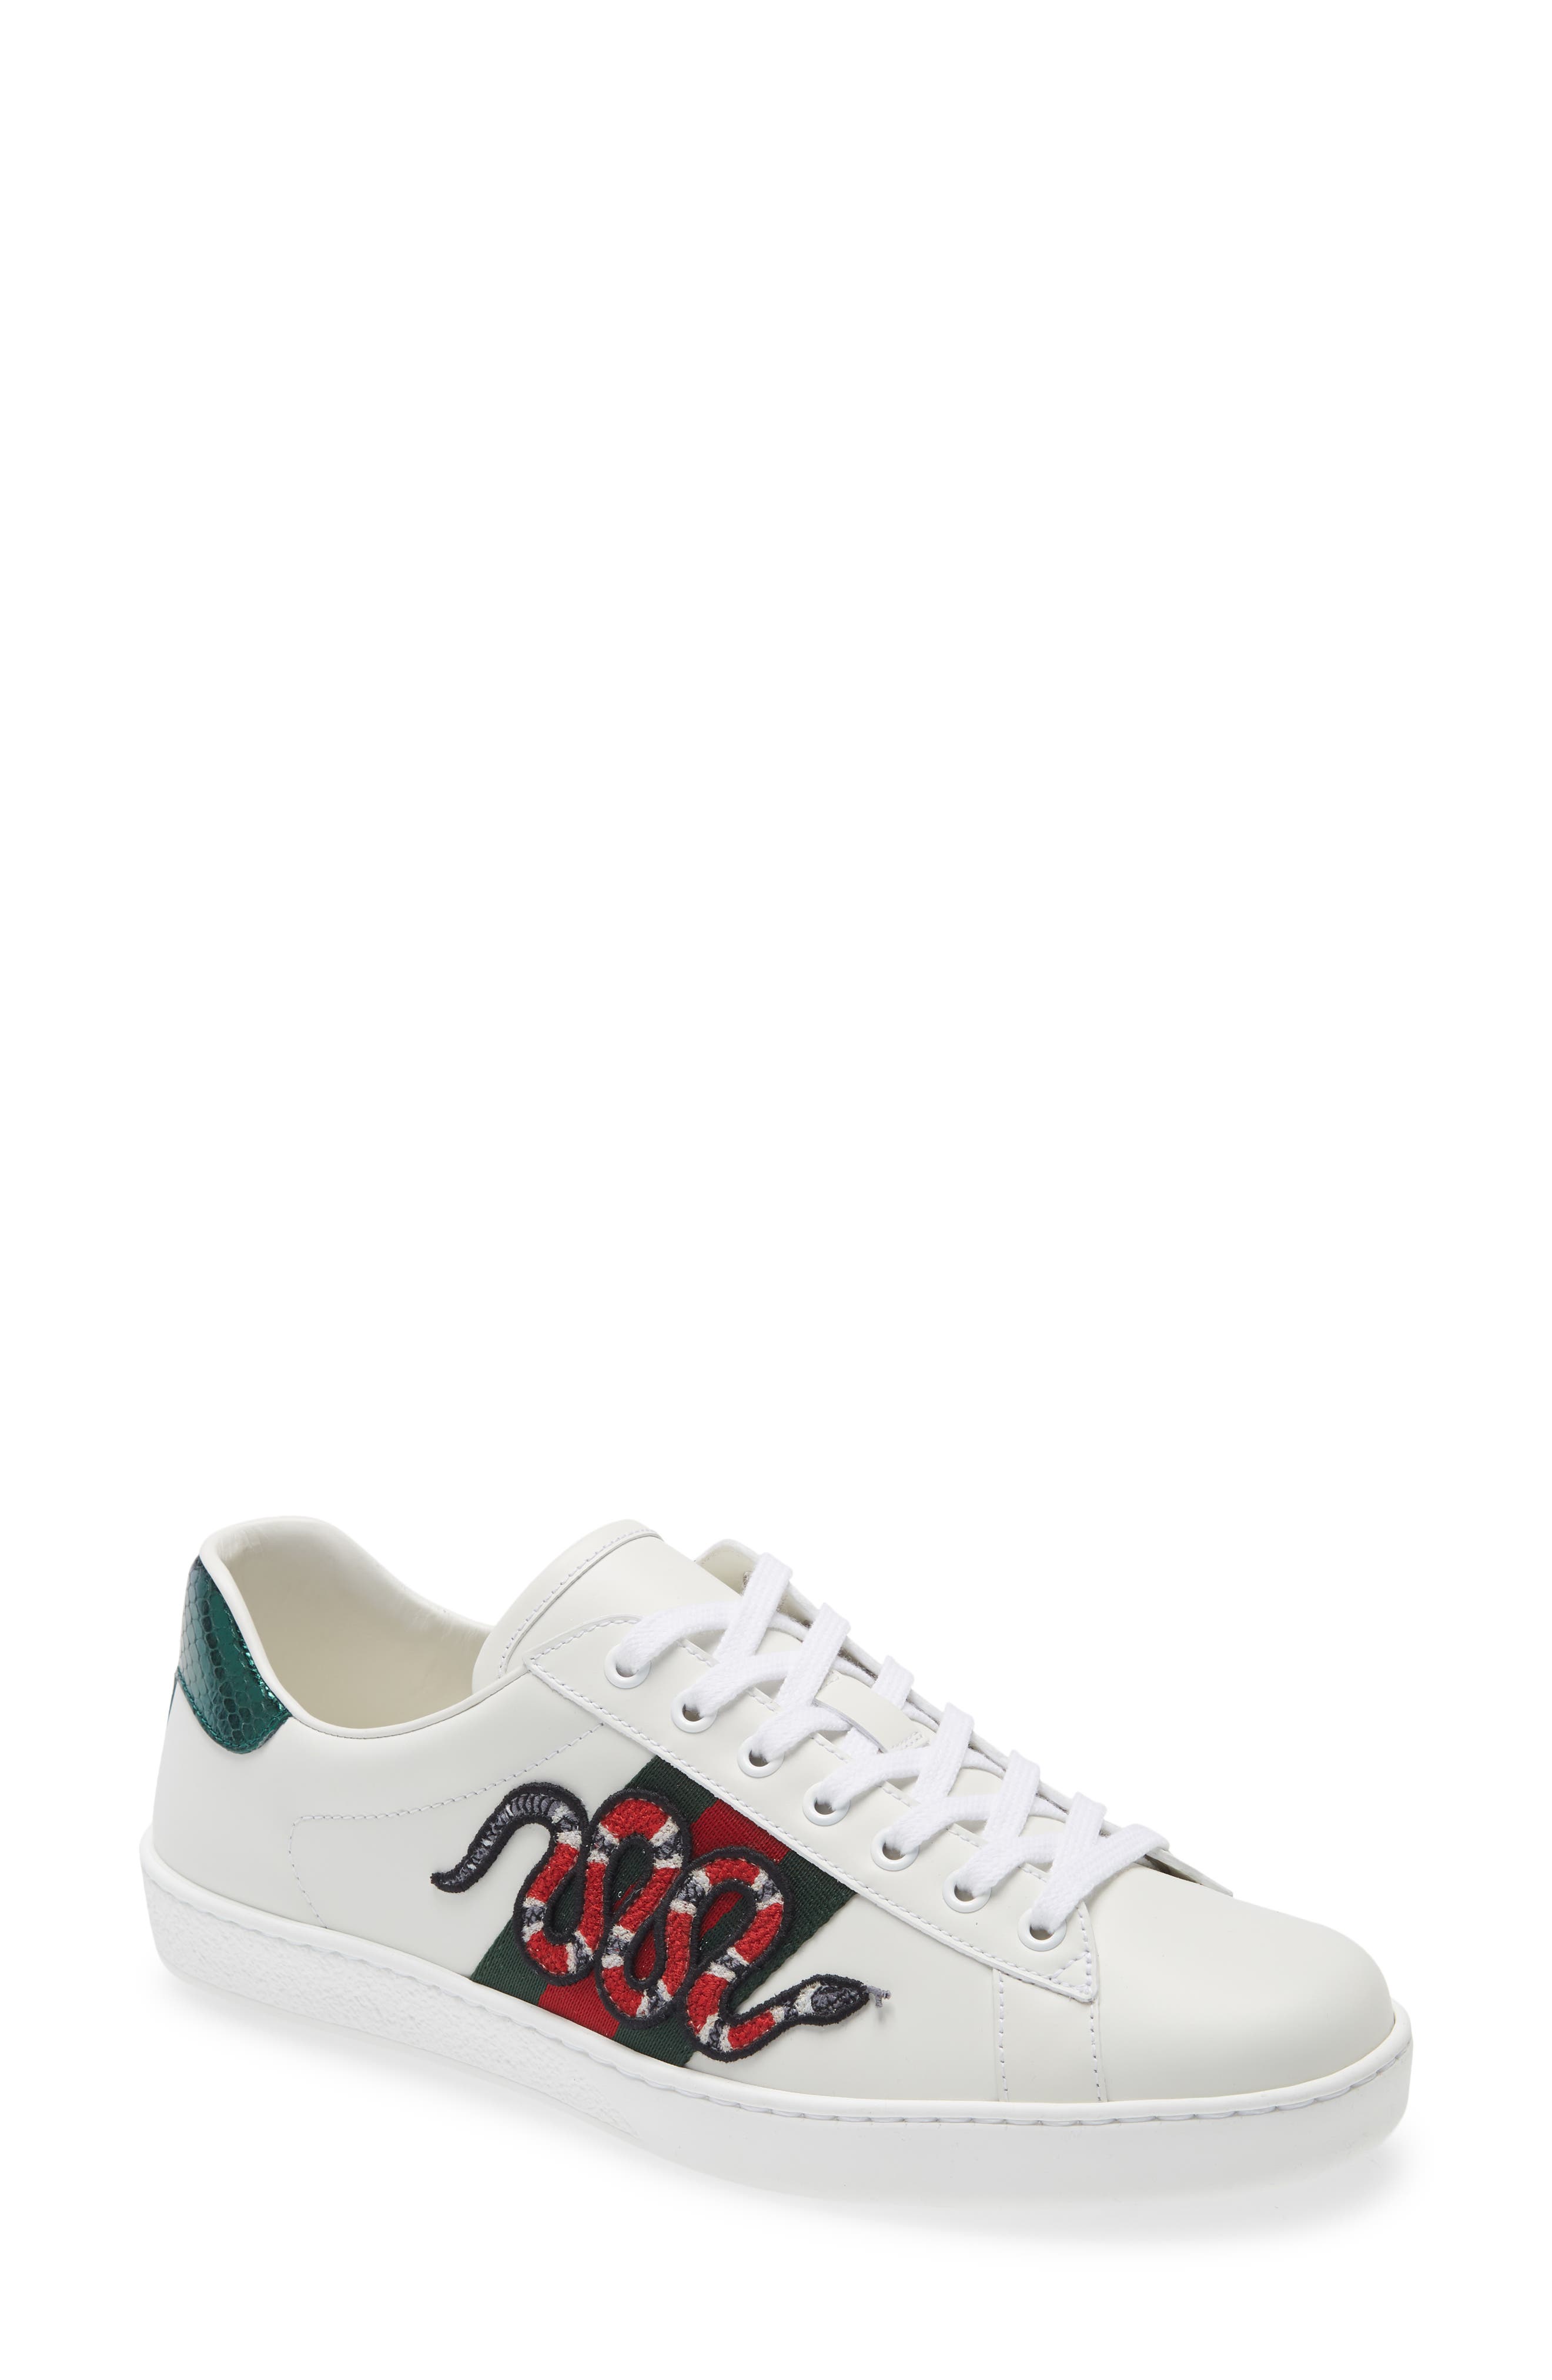 new gucci sneakers for men